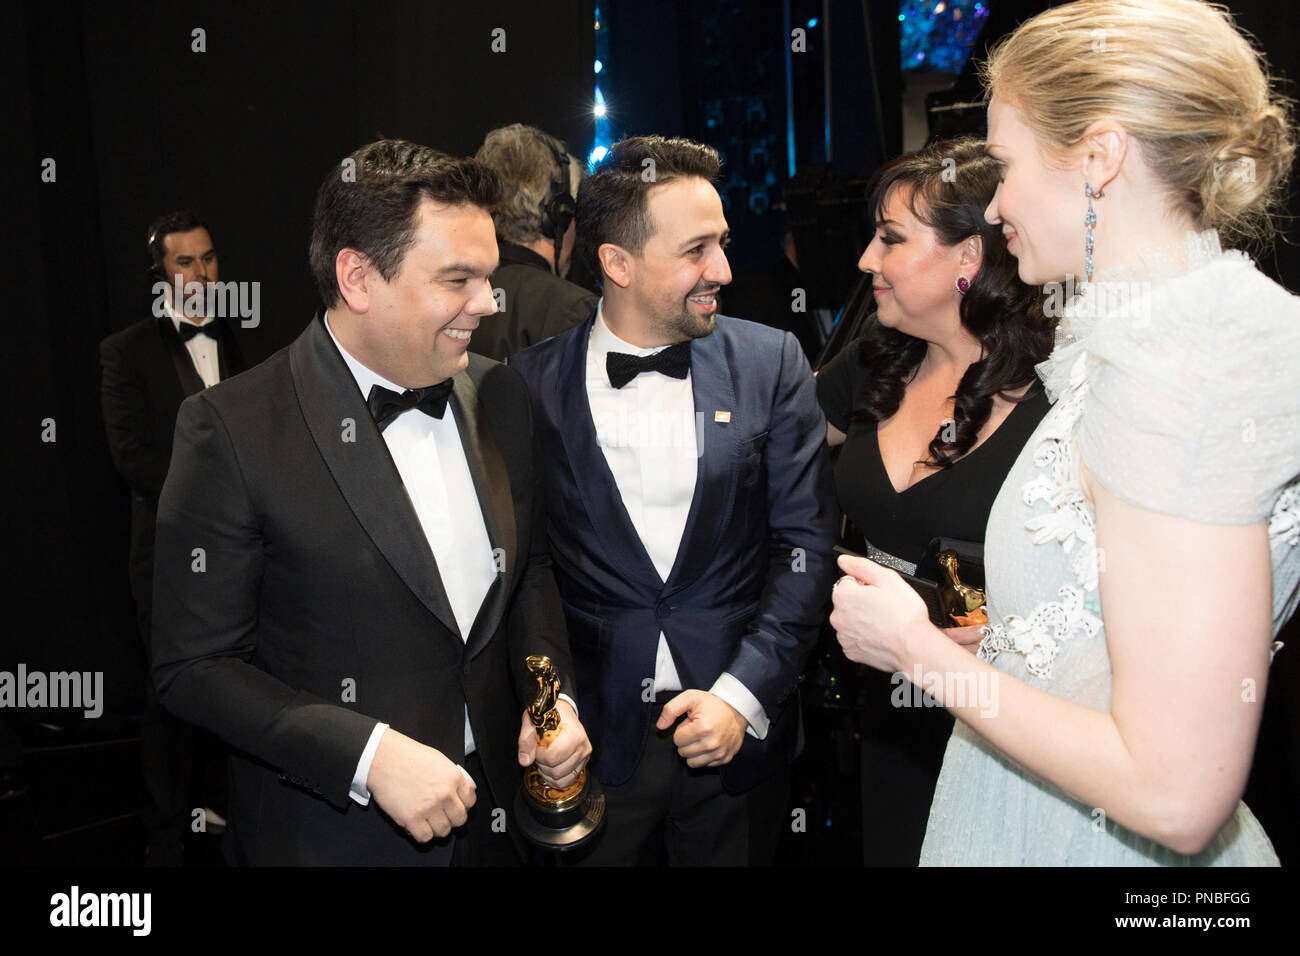 After winning the Oscar® for music written for motion pictures (original song) for “Remember Me” from “Coco”, Kristen Anderson-Lopez and Robert Lopez chat backstage with Lin-Manuel Miranda and Emily Blunt during the live ABC Telecast of The 90th Oscars® at the Dolby® Theatre in Hollywood, CA on Sunday, March 4, 2018.  File Reference # 33546 774PLX  For Editorial Use Only -  All Rights Reserved Stock Photo